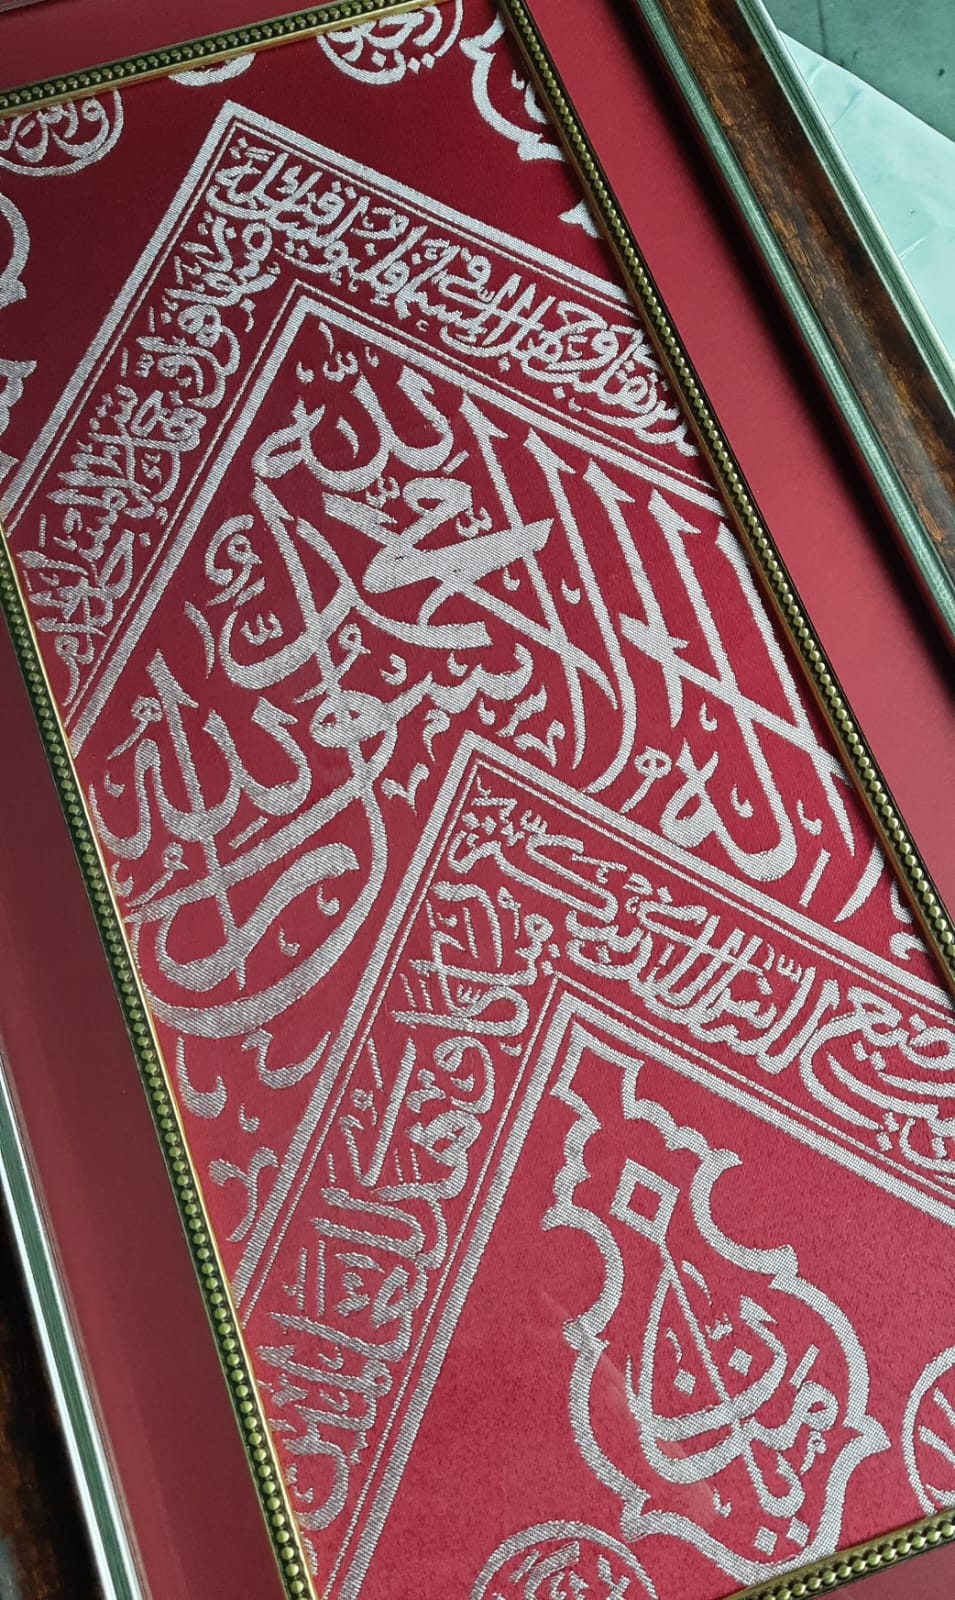 Red Cover Cloth Of Inside Of Holy Kaabah / Muslim Nikah Wedding Gift / Muslim Engagement Present Wall Art